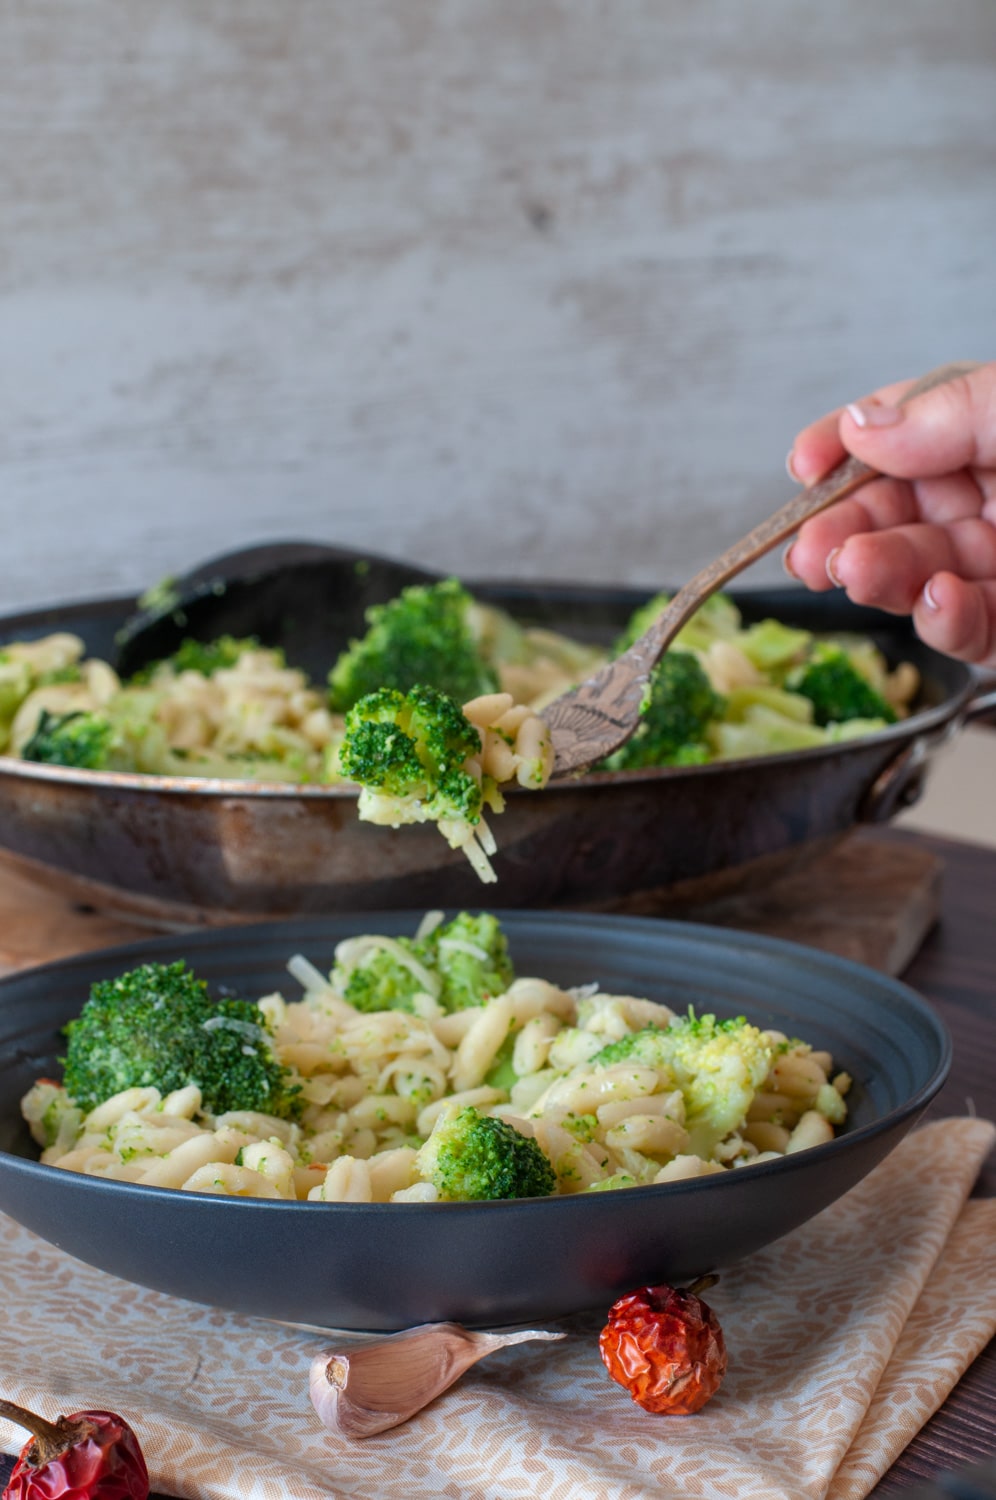 Cavatelli and broccoli served on a plate and a fork lifting a bite